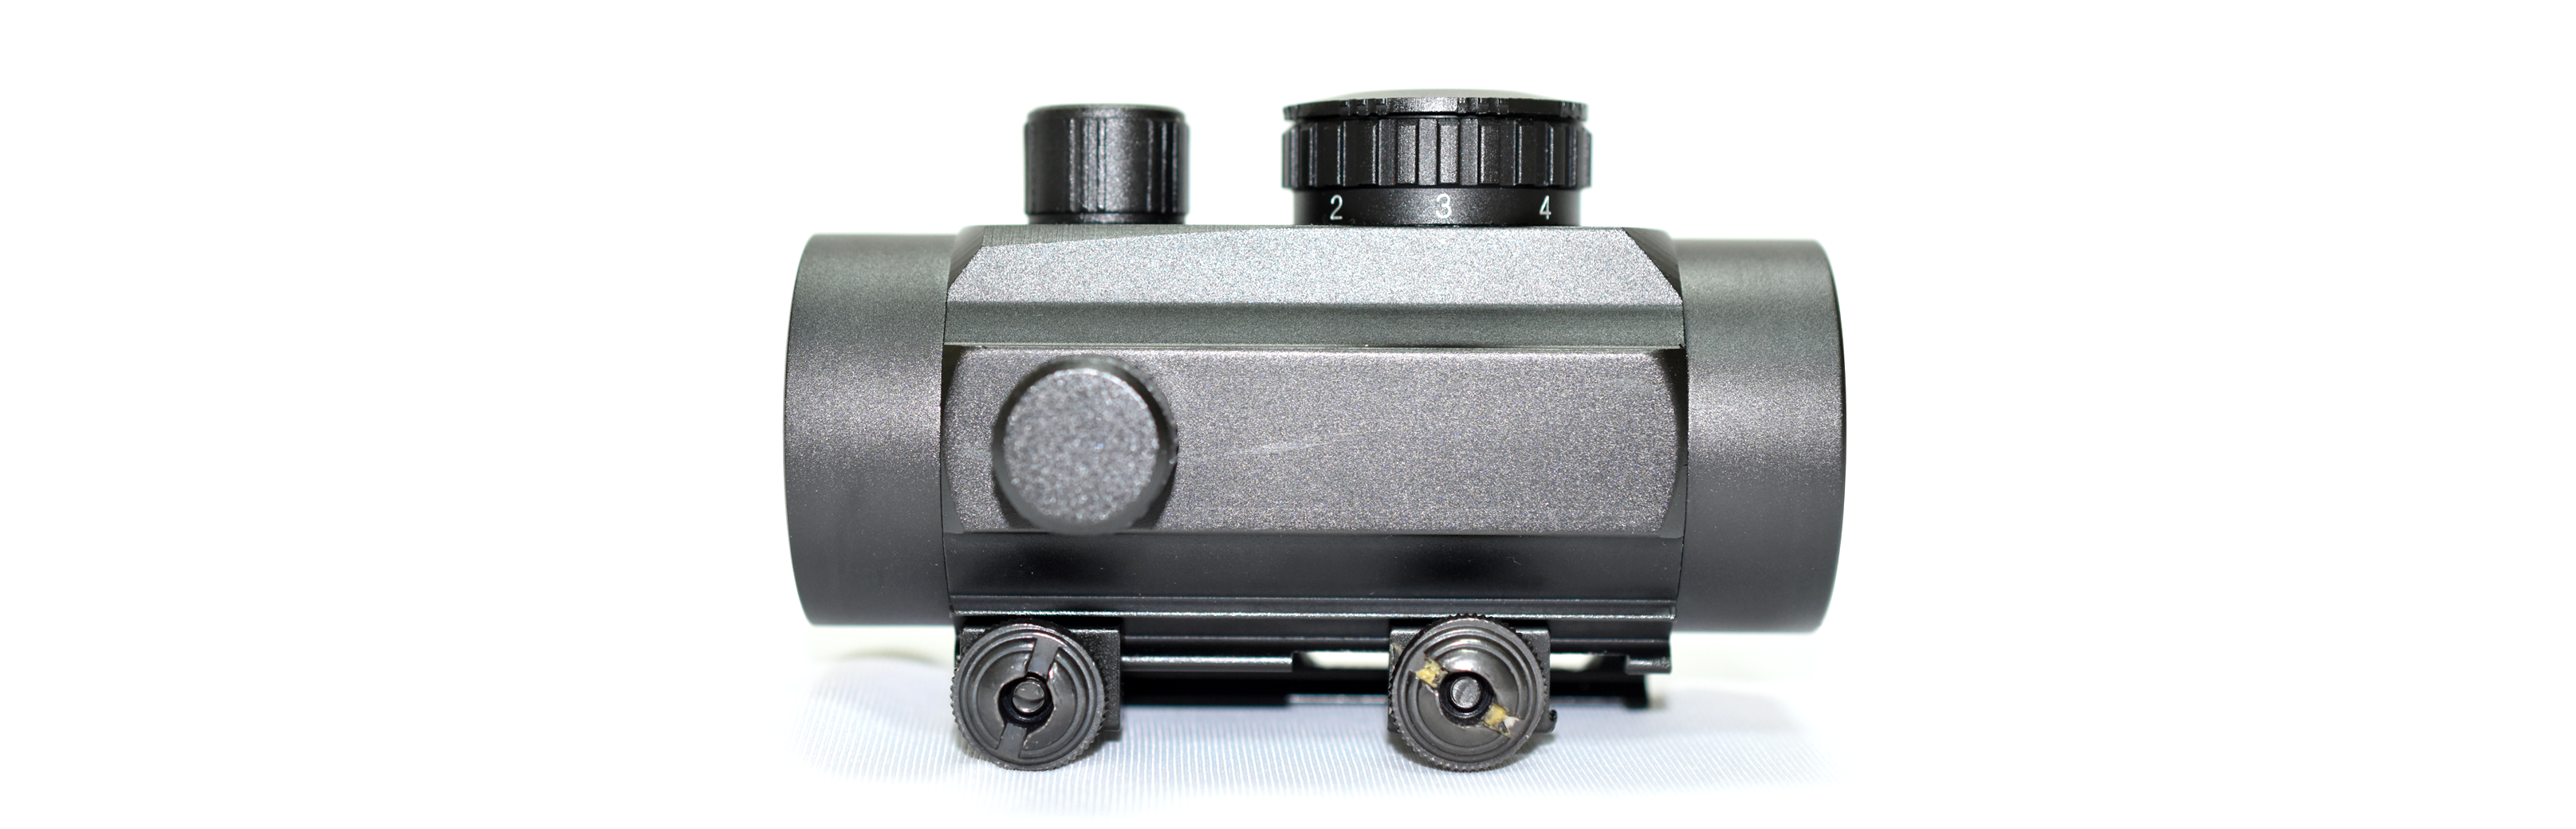 /archive/product/item/images/RedDotSightScope/Red-Dot-Sight-Scope-2.png